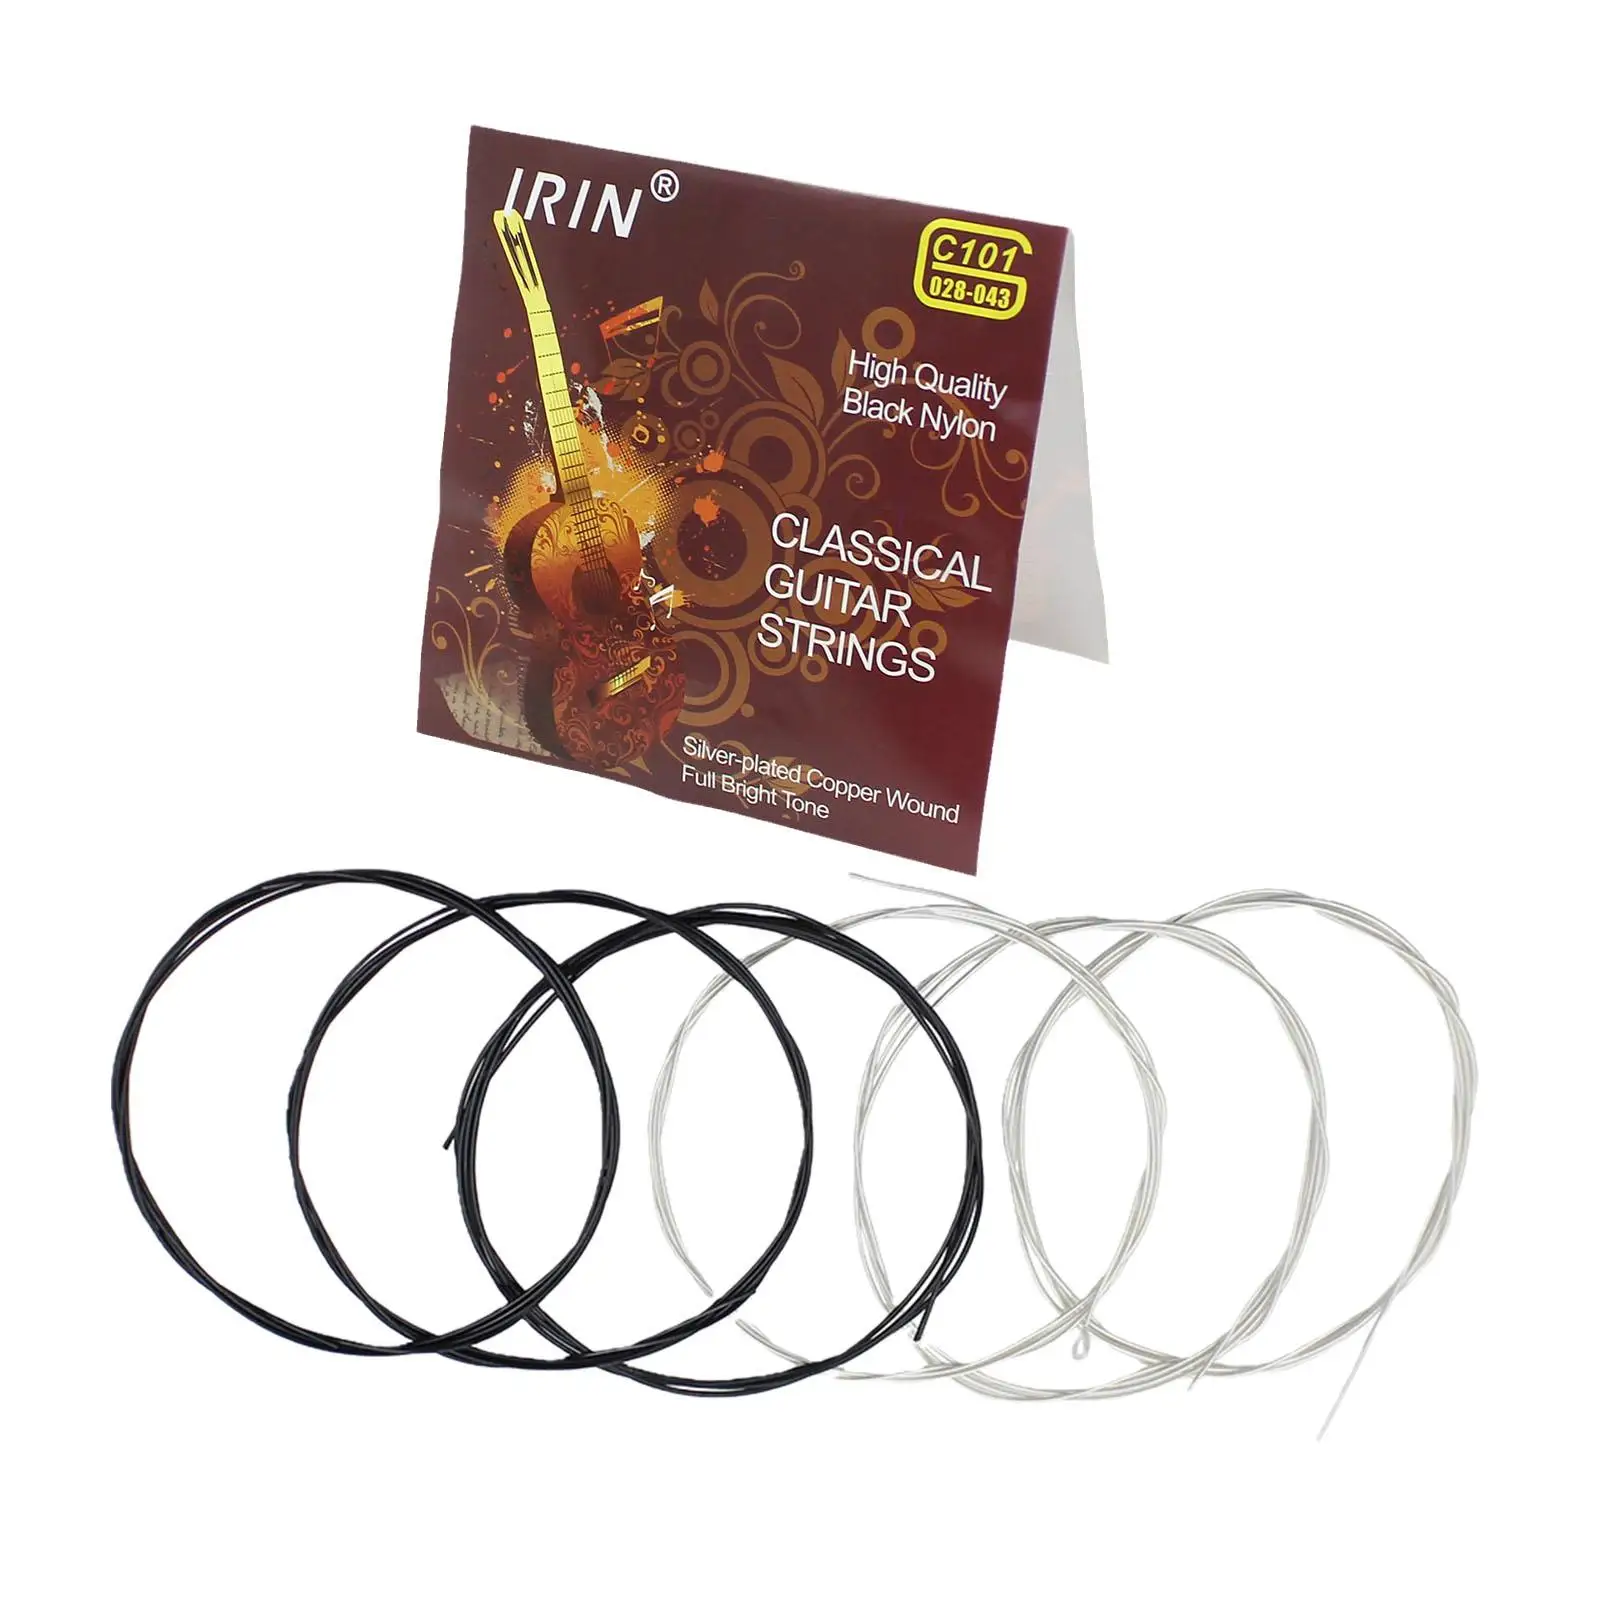 6Pcs Classical Guitar String Set Black Nylon Core Silver-Plated Wound 1st-6th Guitar Strings Guitarra Spare Part